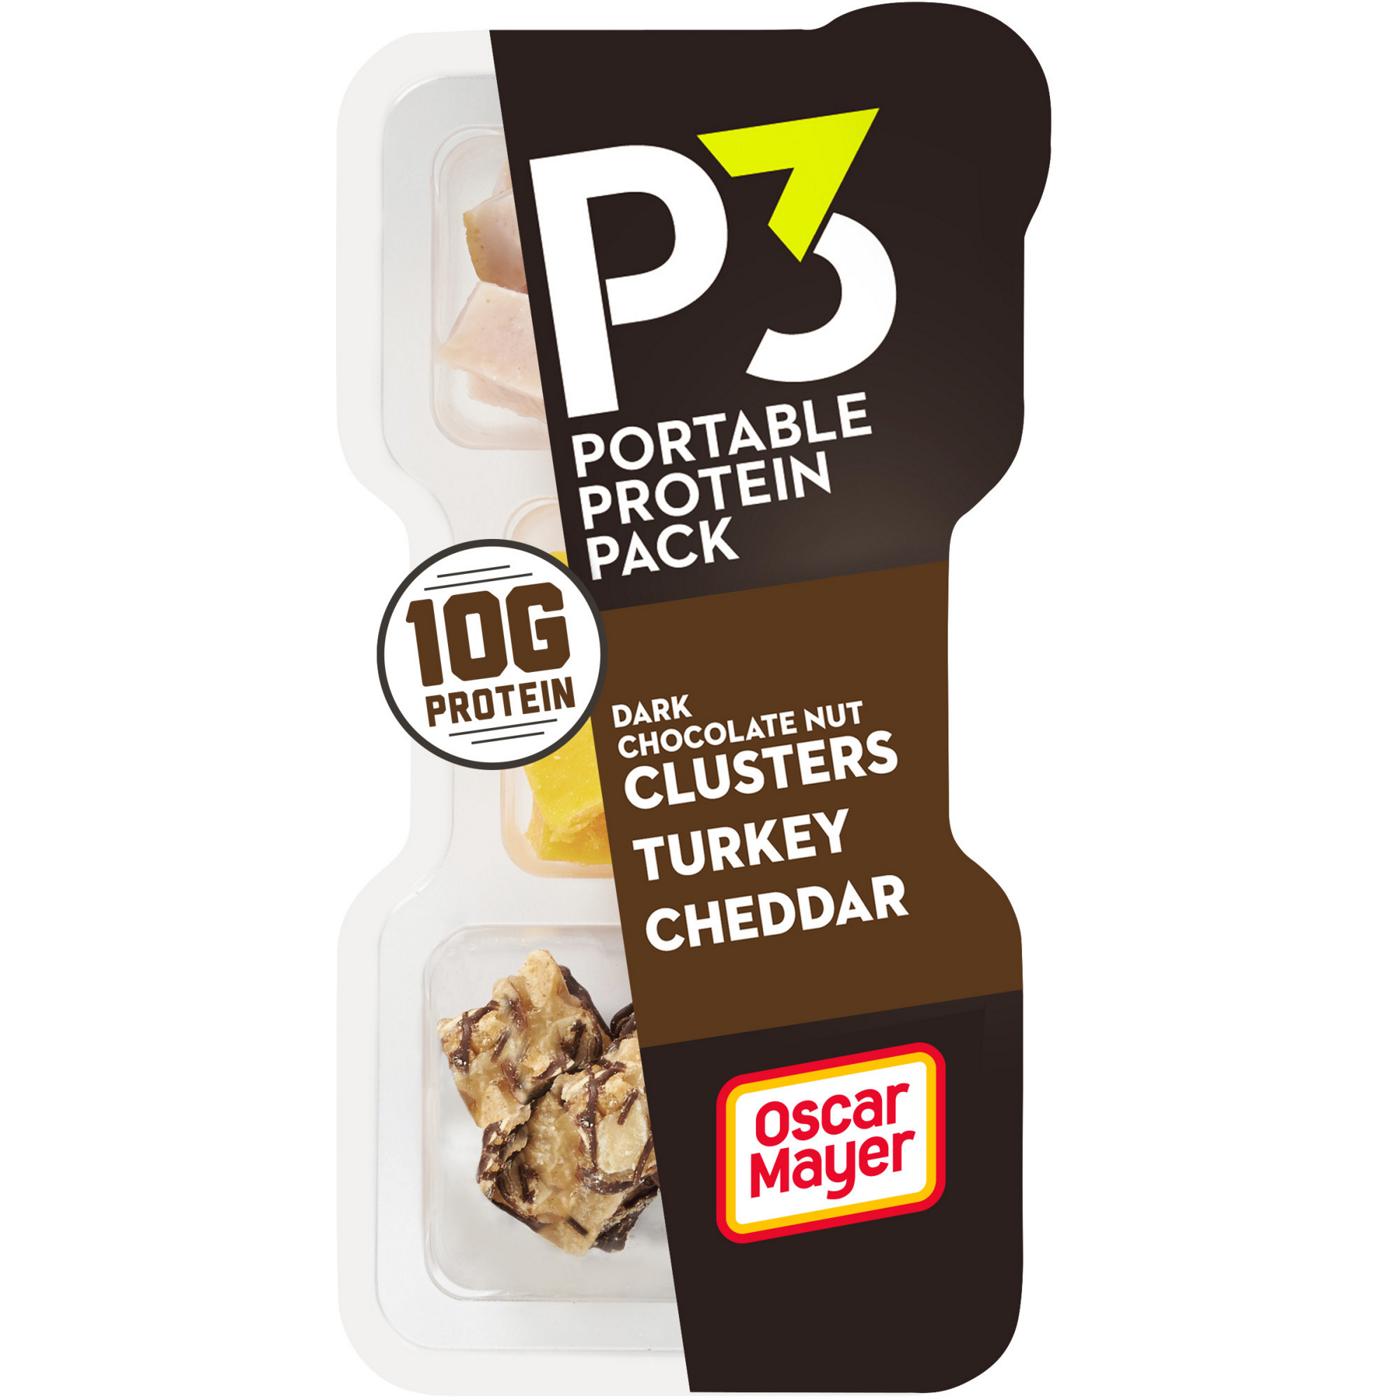 P3 Portable Protein Pack Snack Tray - Dark Chocolate Nut Clusters, Turkey & Cheddar; image 1 of 6